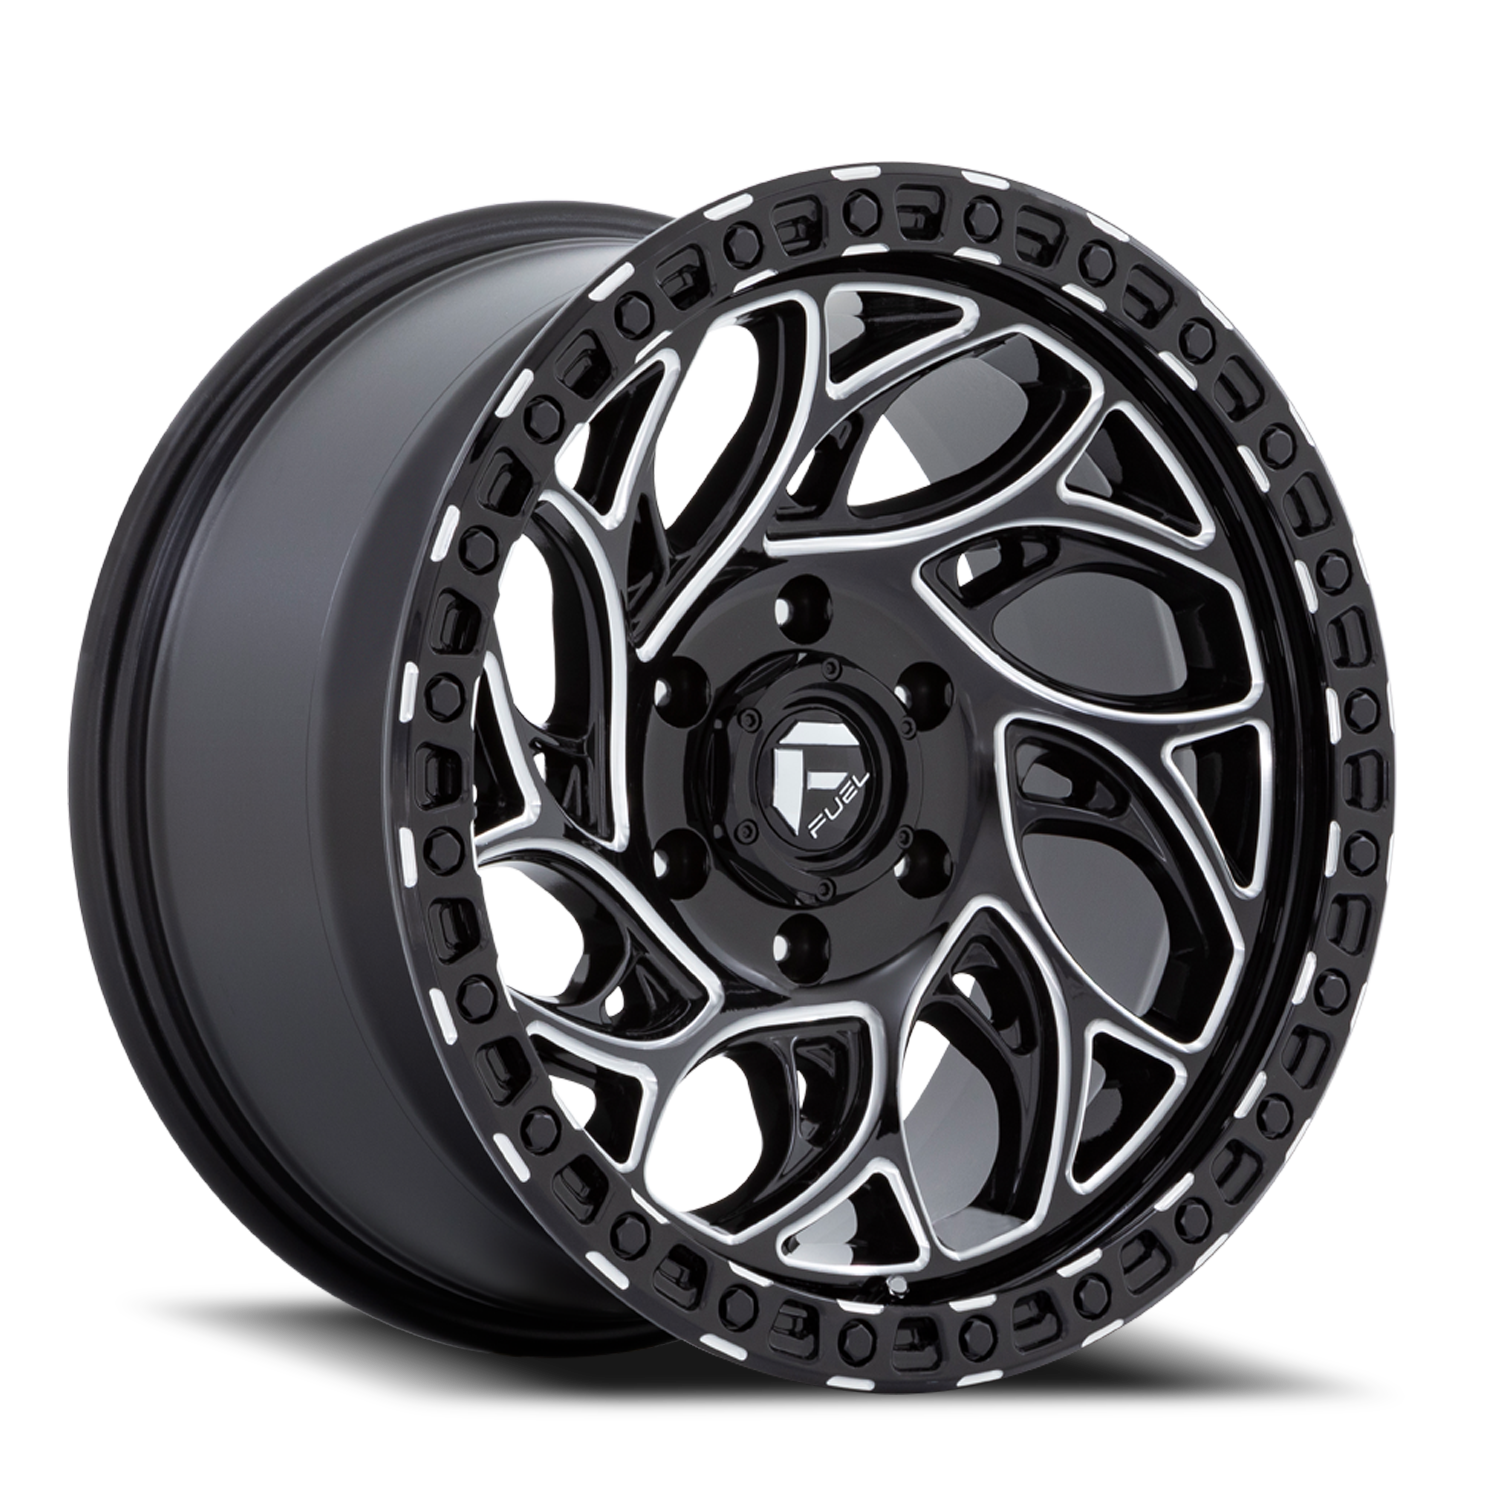 Aluminum Wheels 15X10 Runner OR D840 5 On 114.3 Gloss Black Milled 72.56 Bore -43 Offset Fuel Off Road Wheels